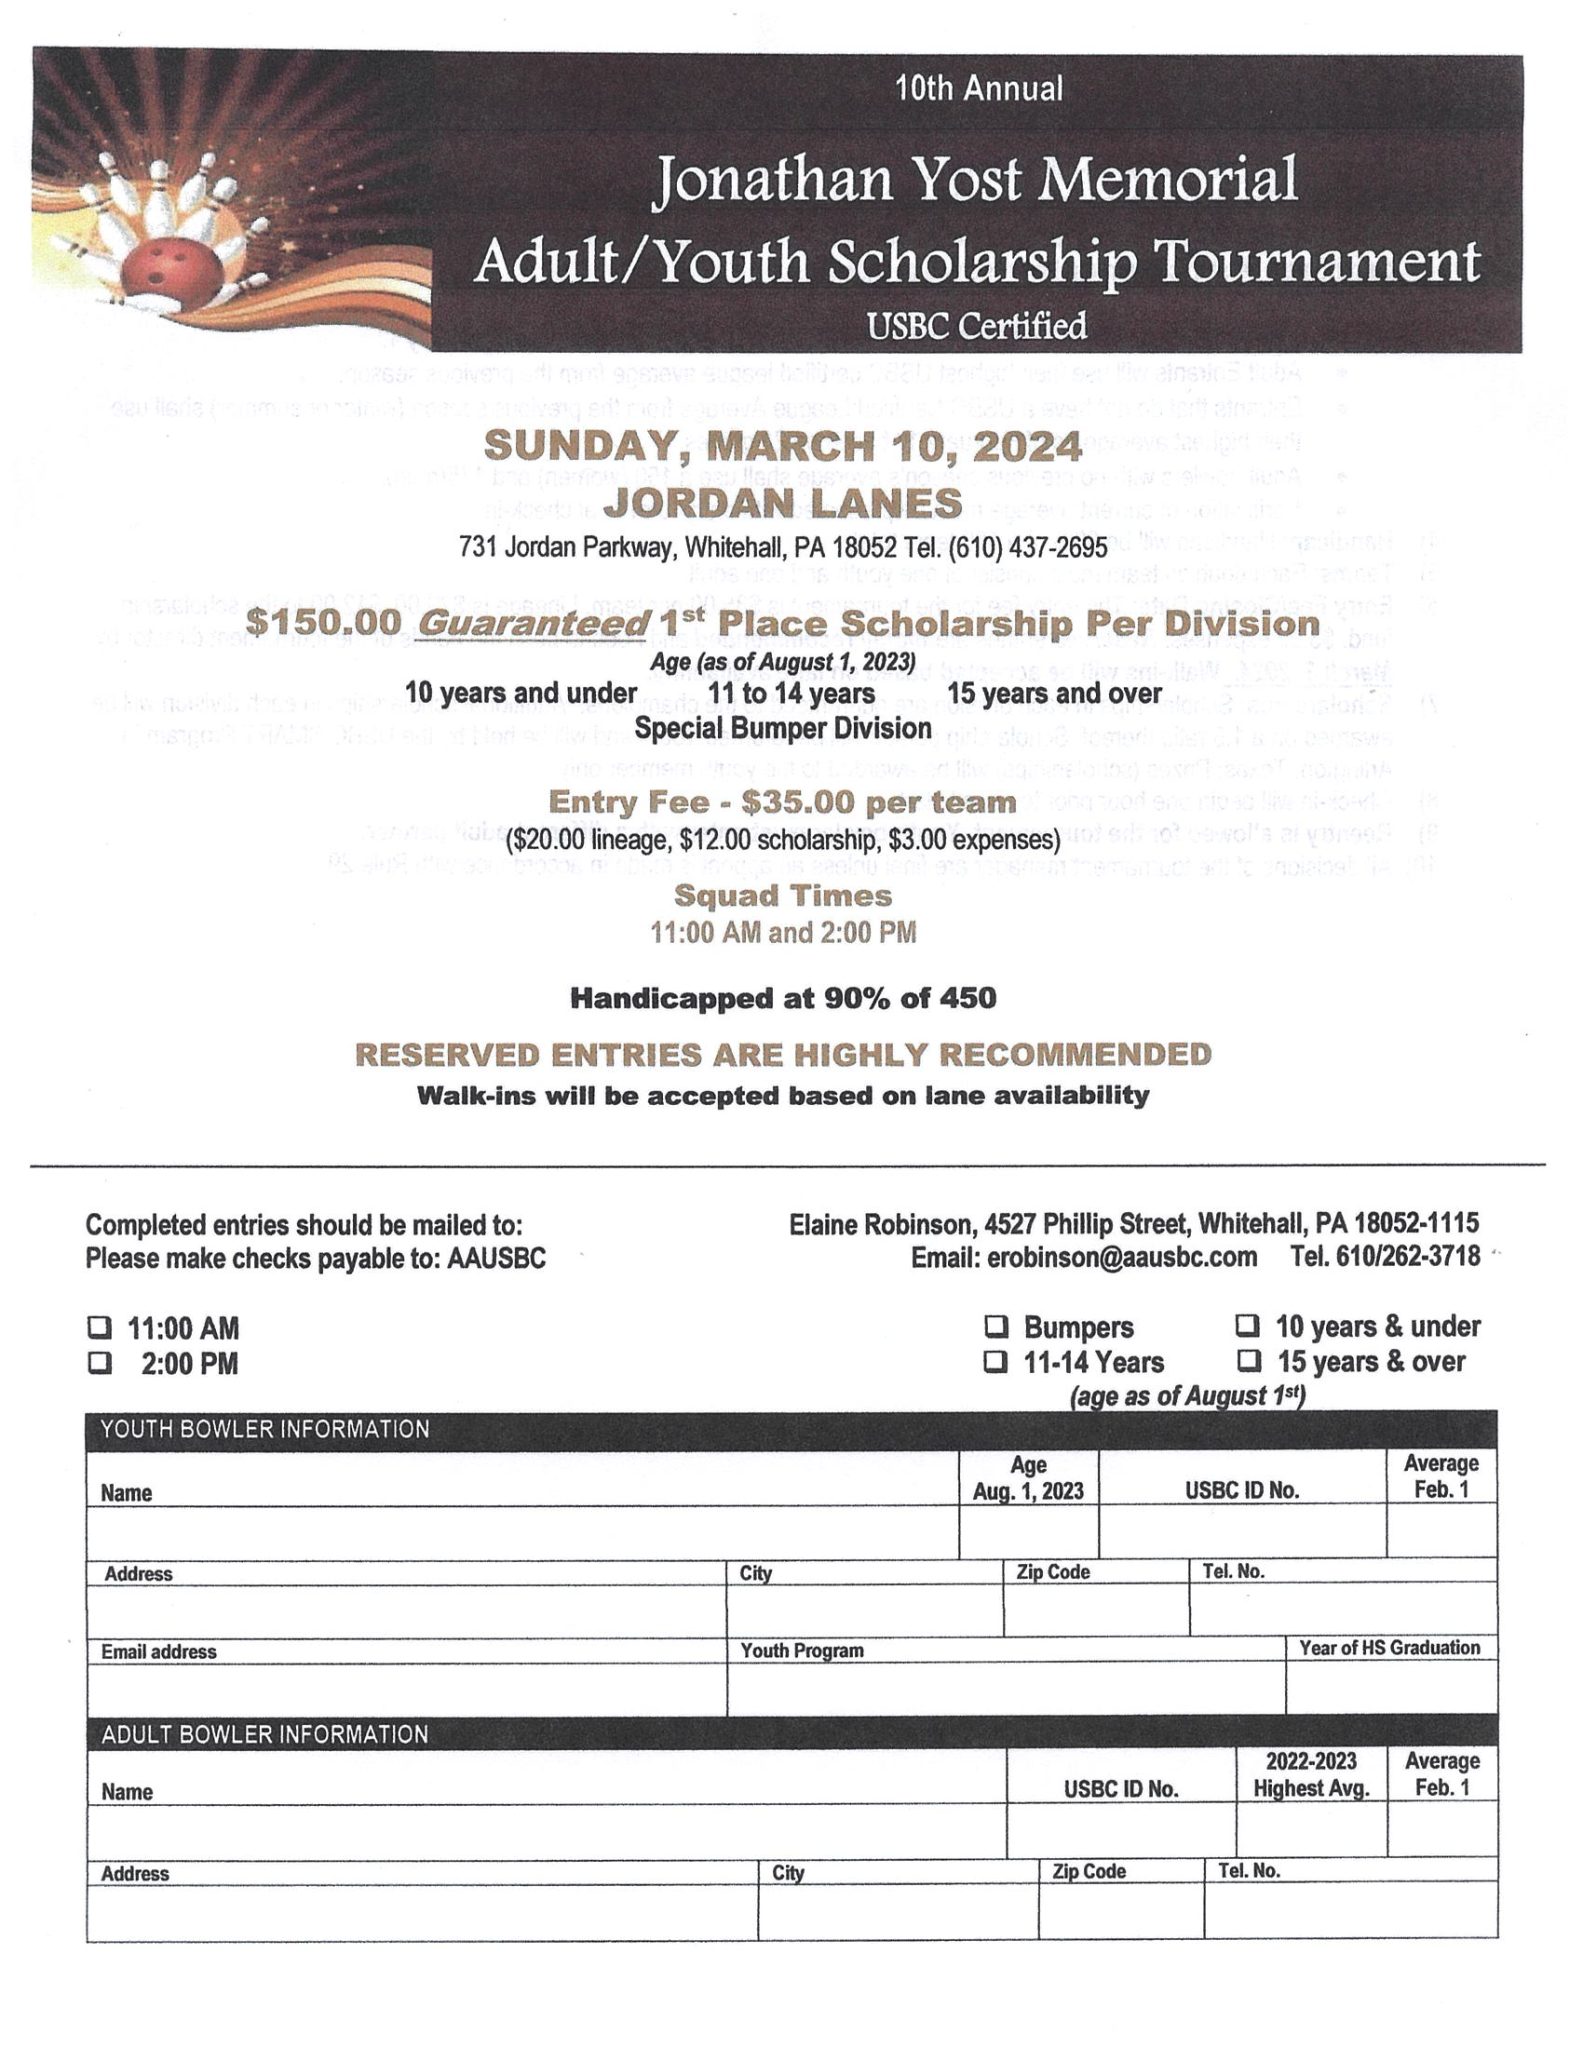 10th Annual Jonathan Yost Memorial Adult / Youth Scholarship Tournament 8